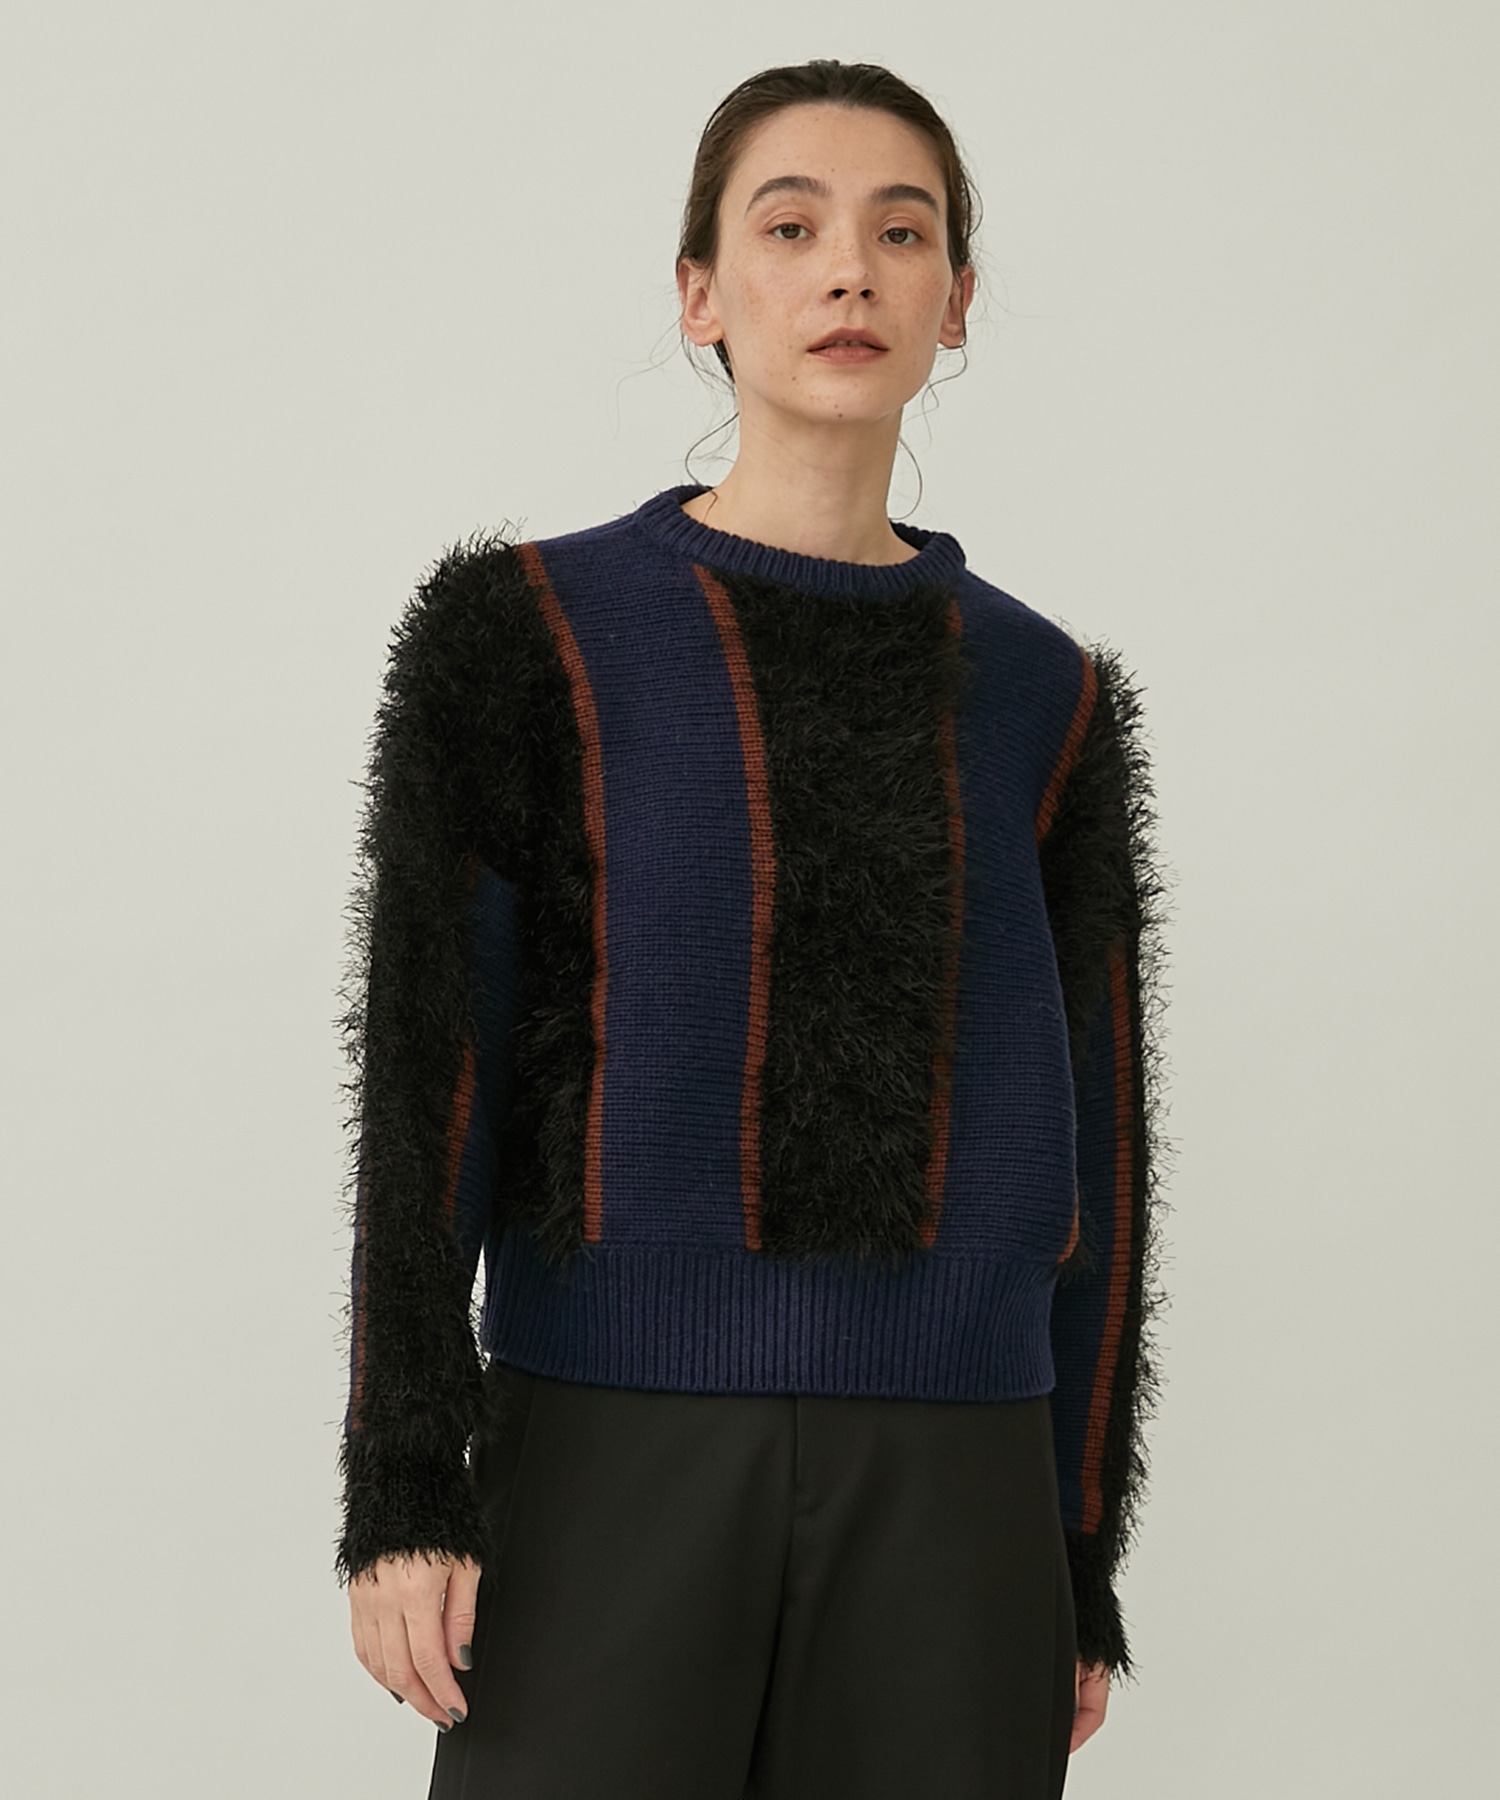 Mole knit pullover｜STUDIOUS